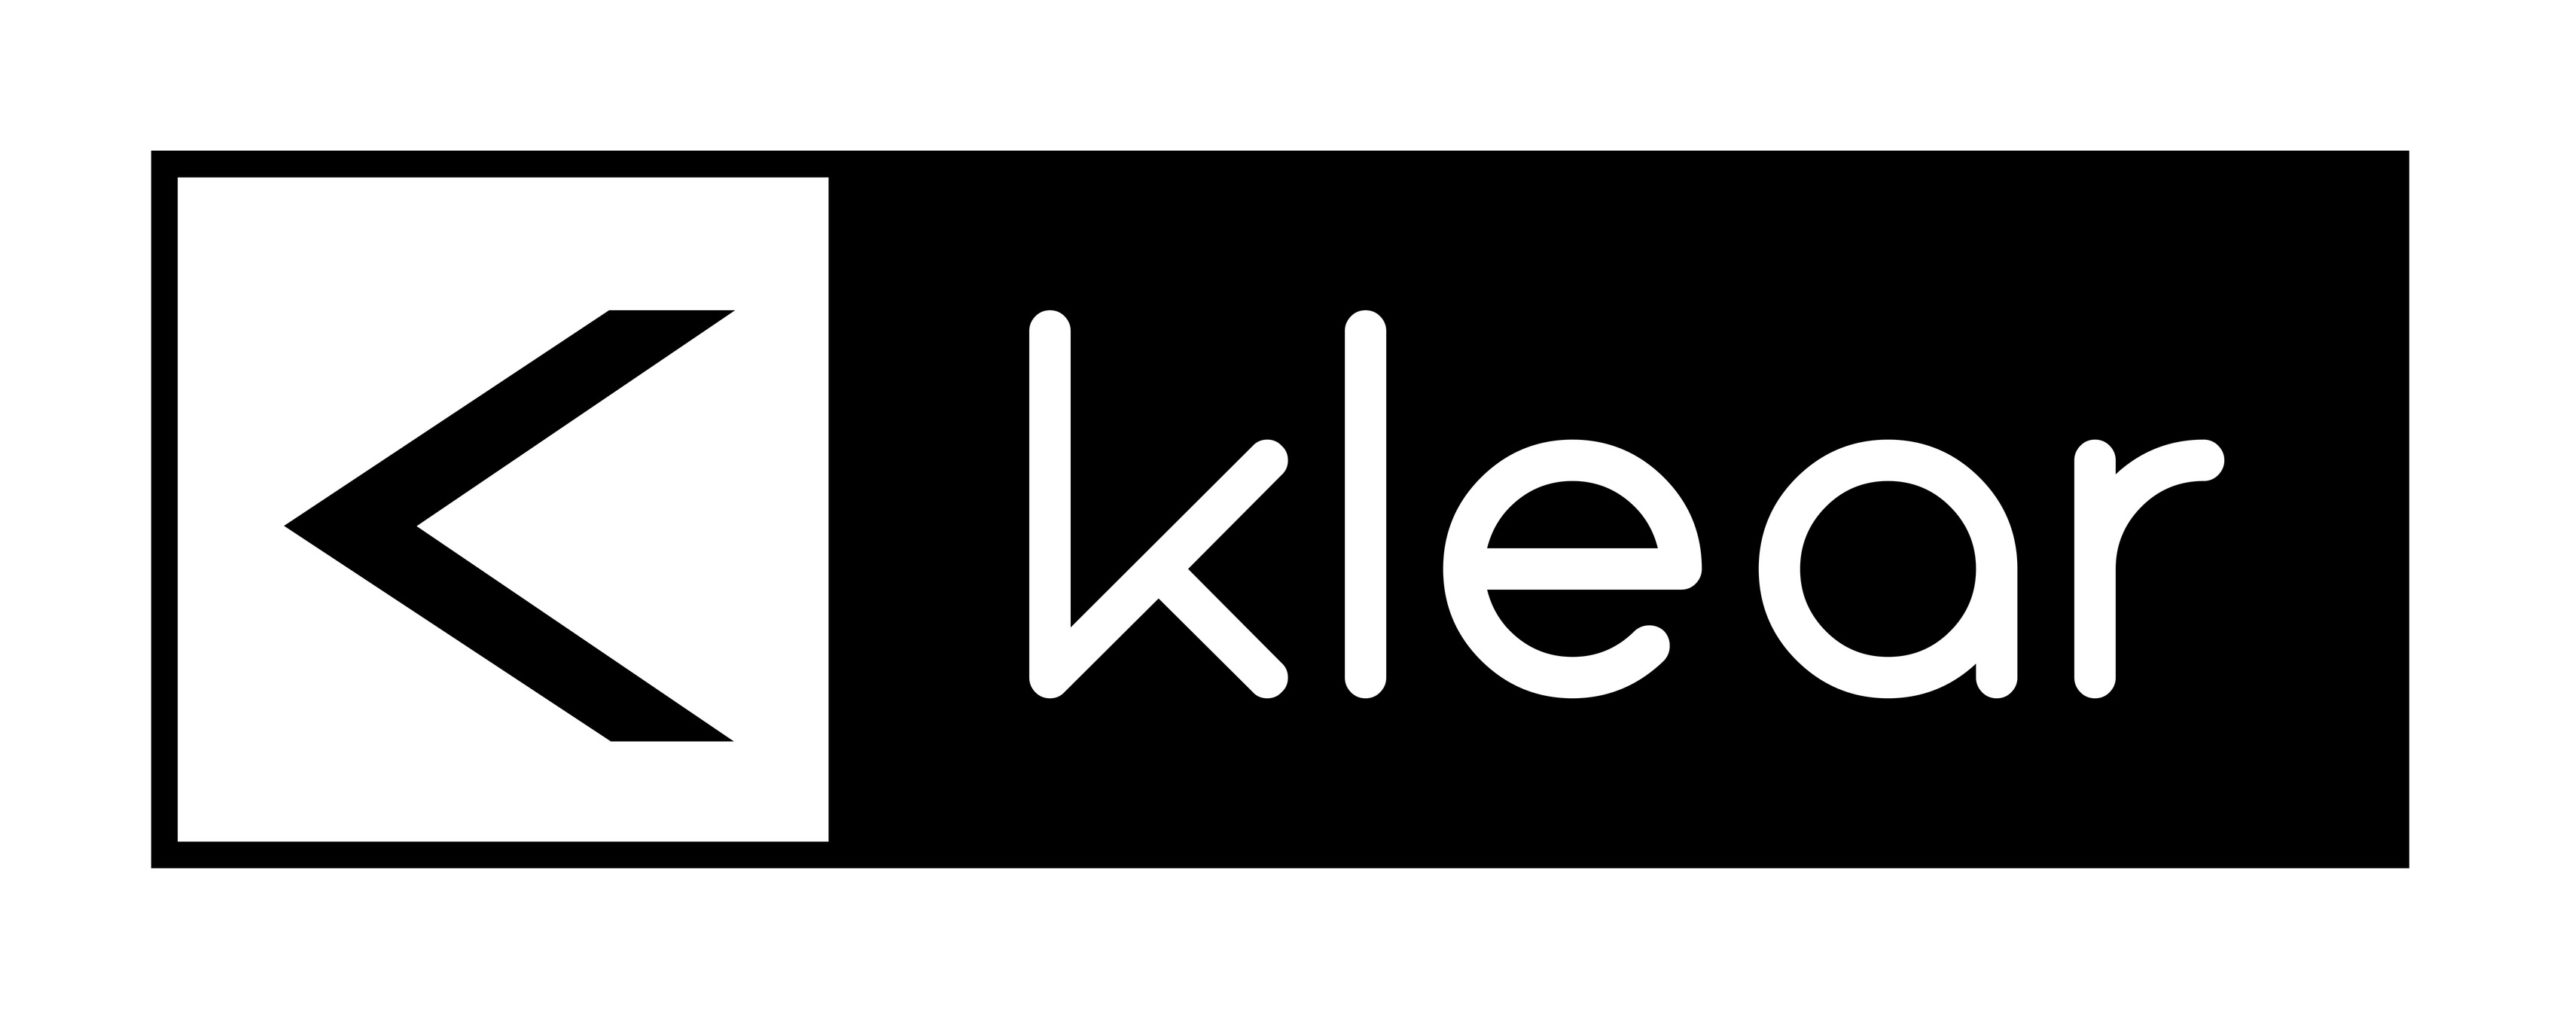 Klear - Account-Based Marketing and Growth